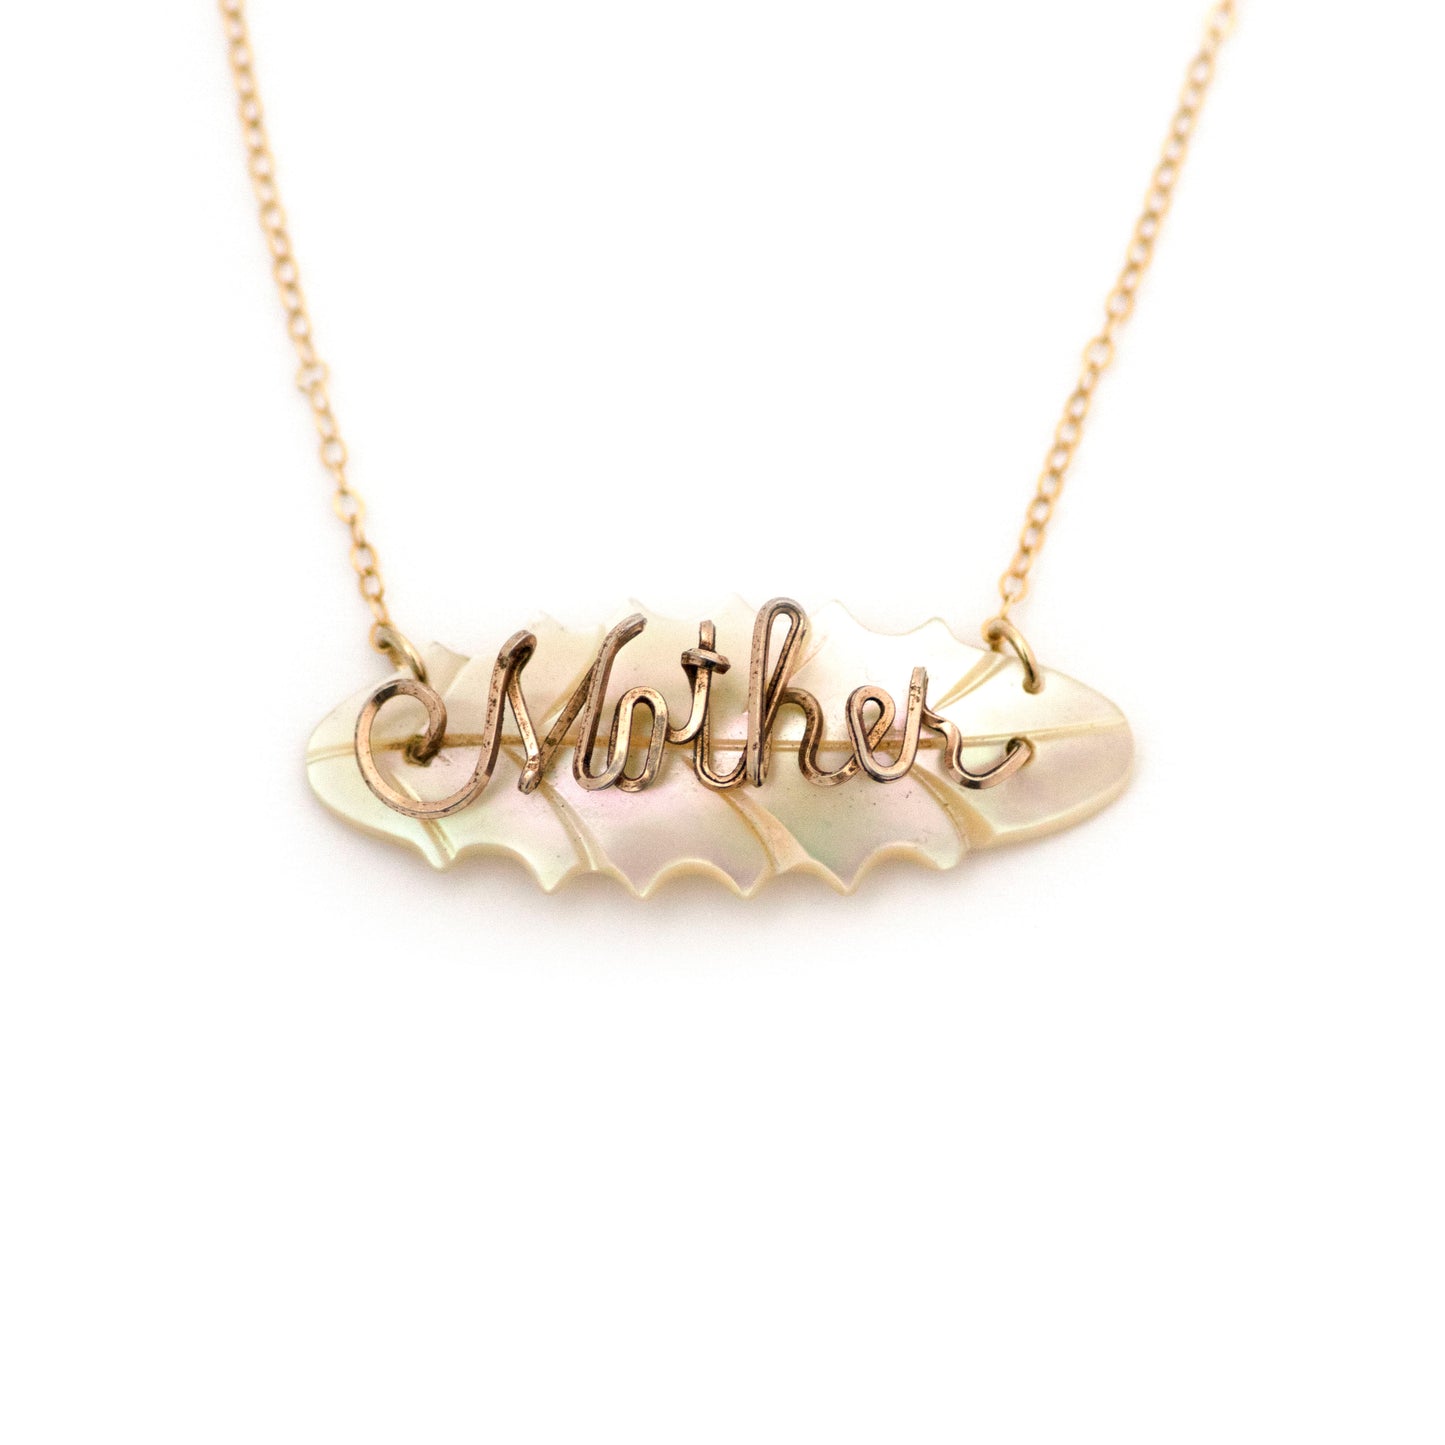 "Mother" gold filled and mother of pearl leaf pendant necklace. Pendant is converted from a mid century brooch.